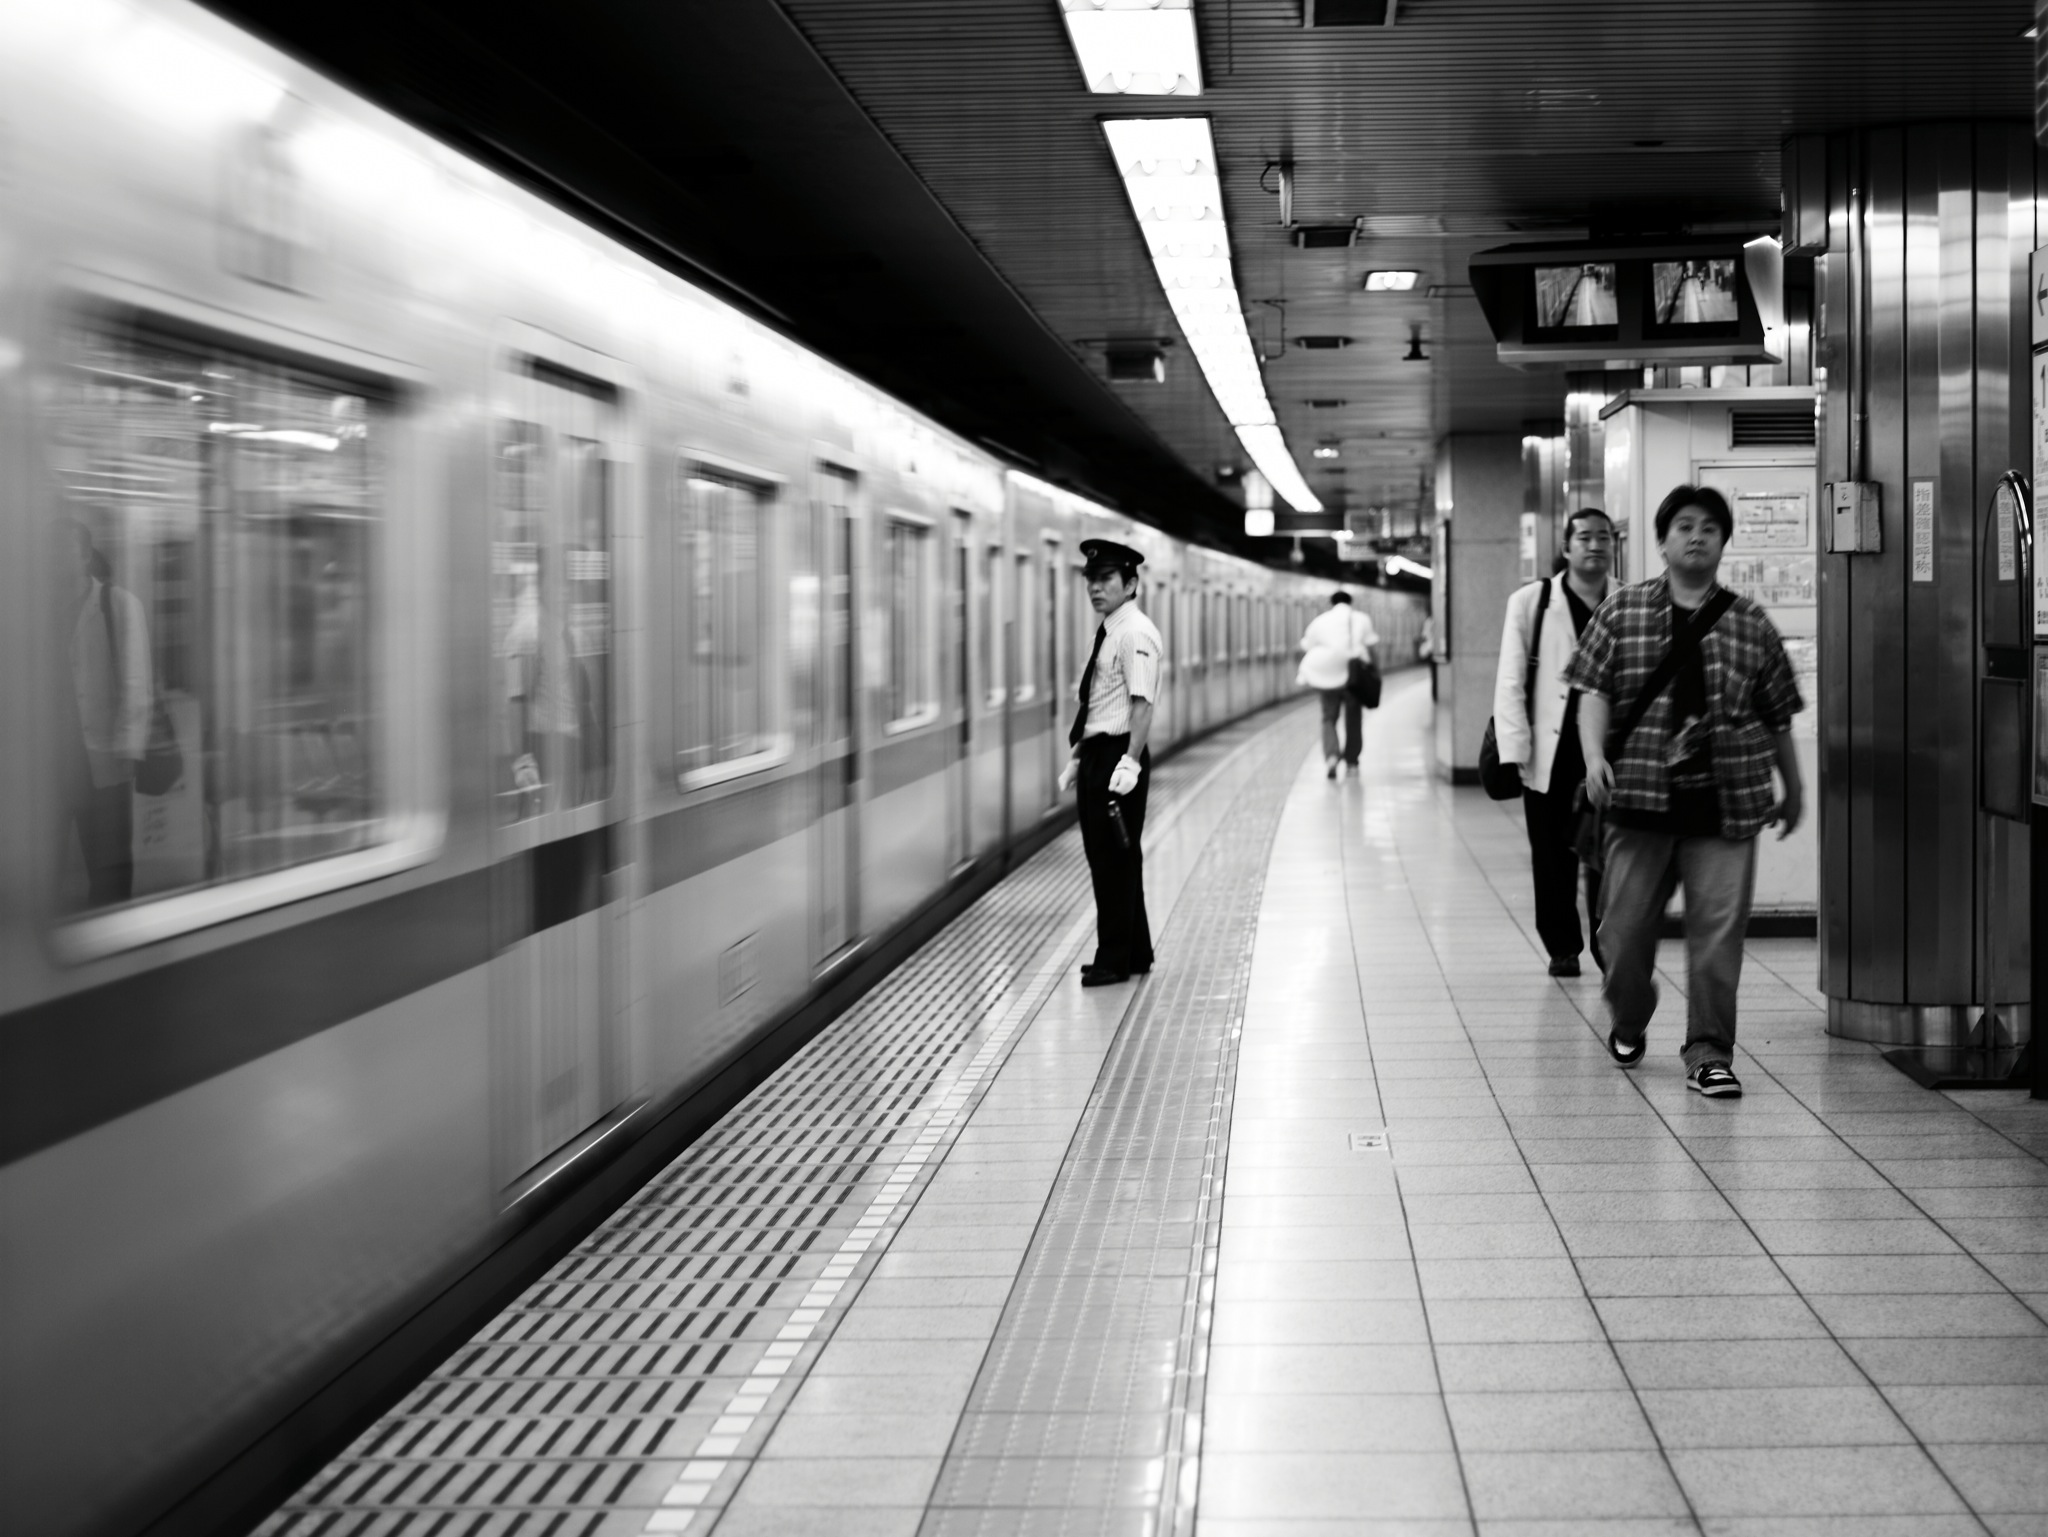 a group of people are walking down the platform